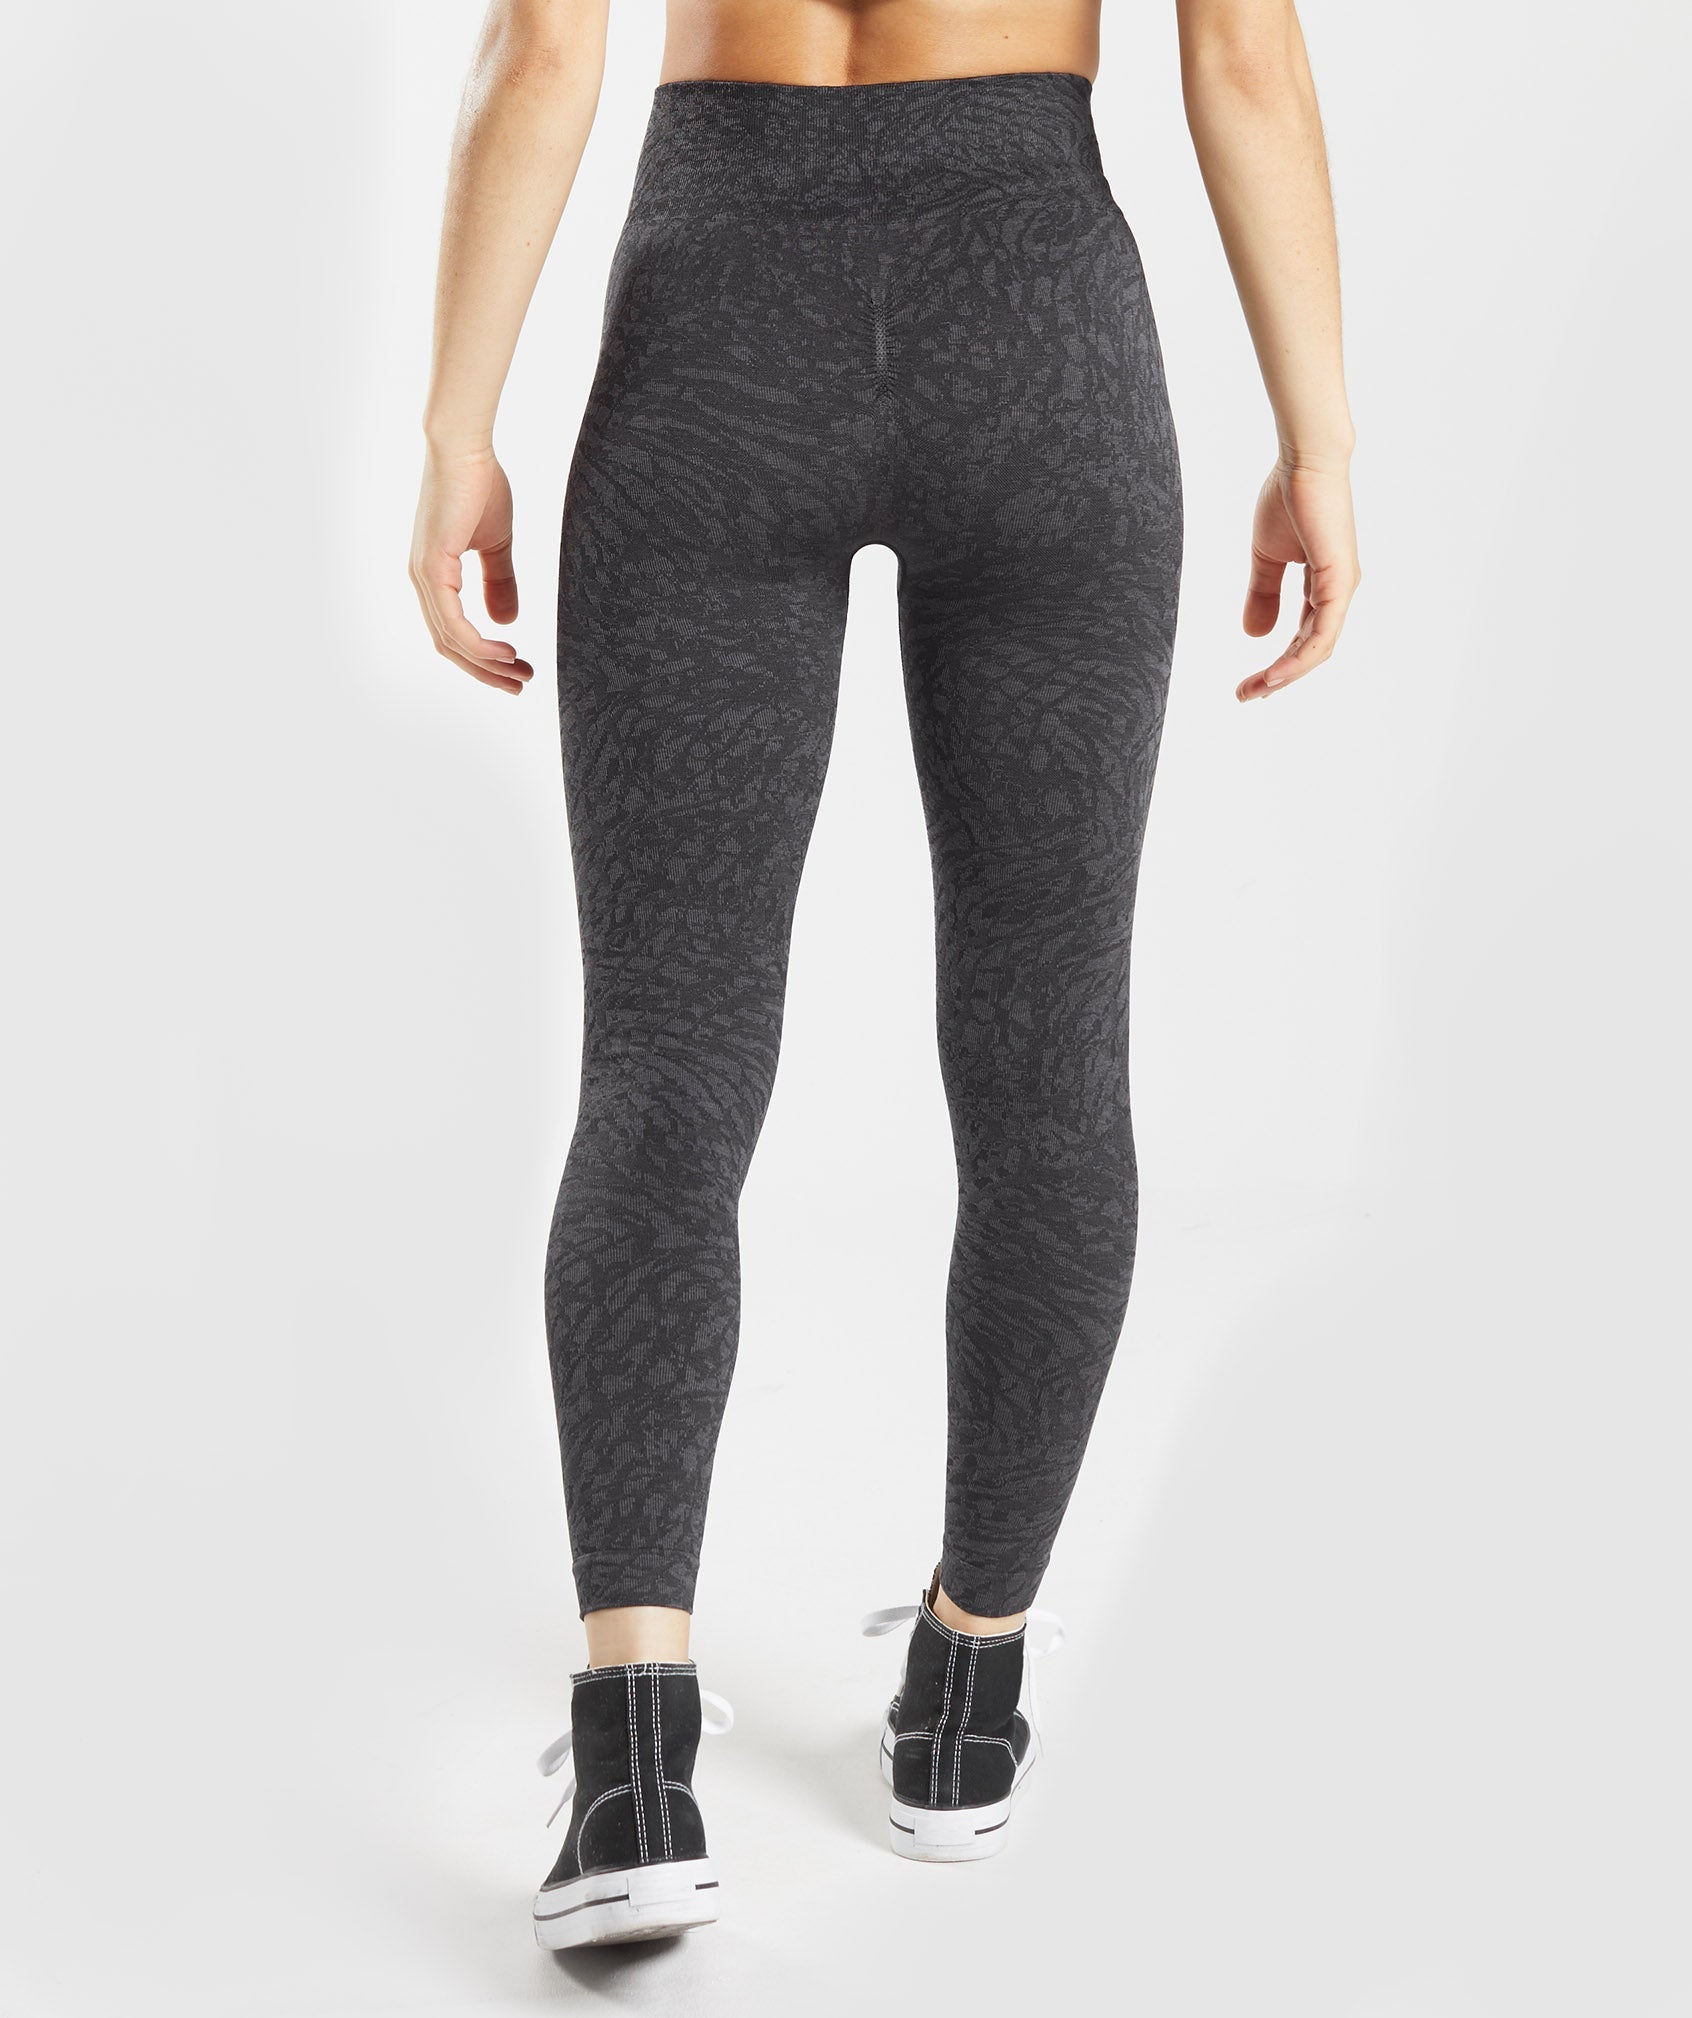 GYMSHARK NEW RELEASES  adapt animal + adapt marl seamless review and try  on 